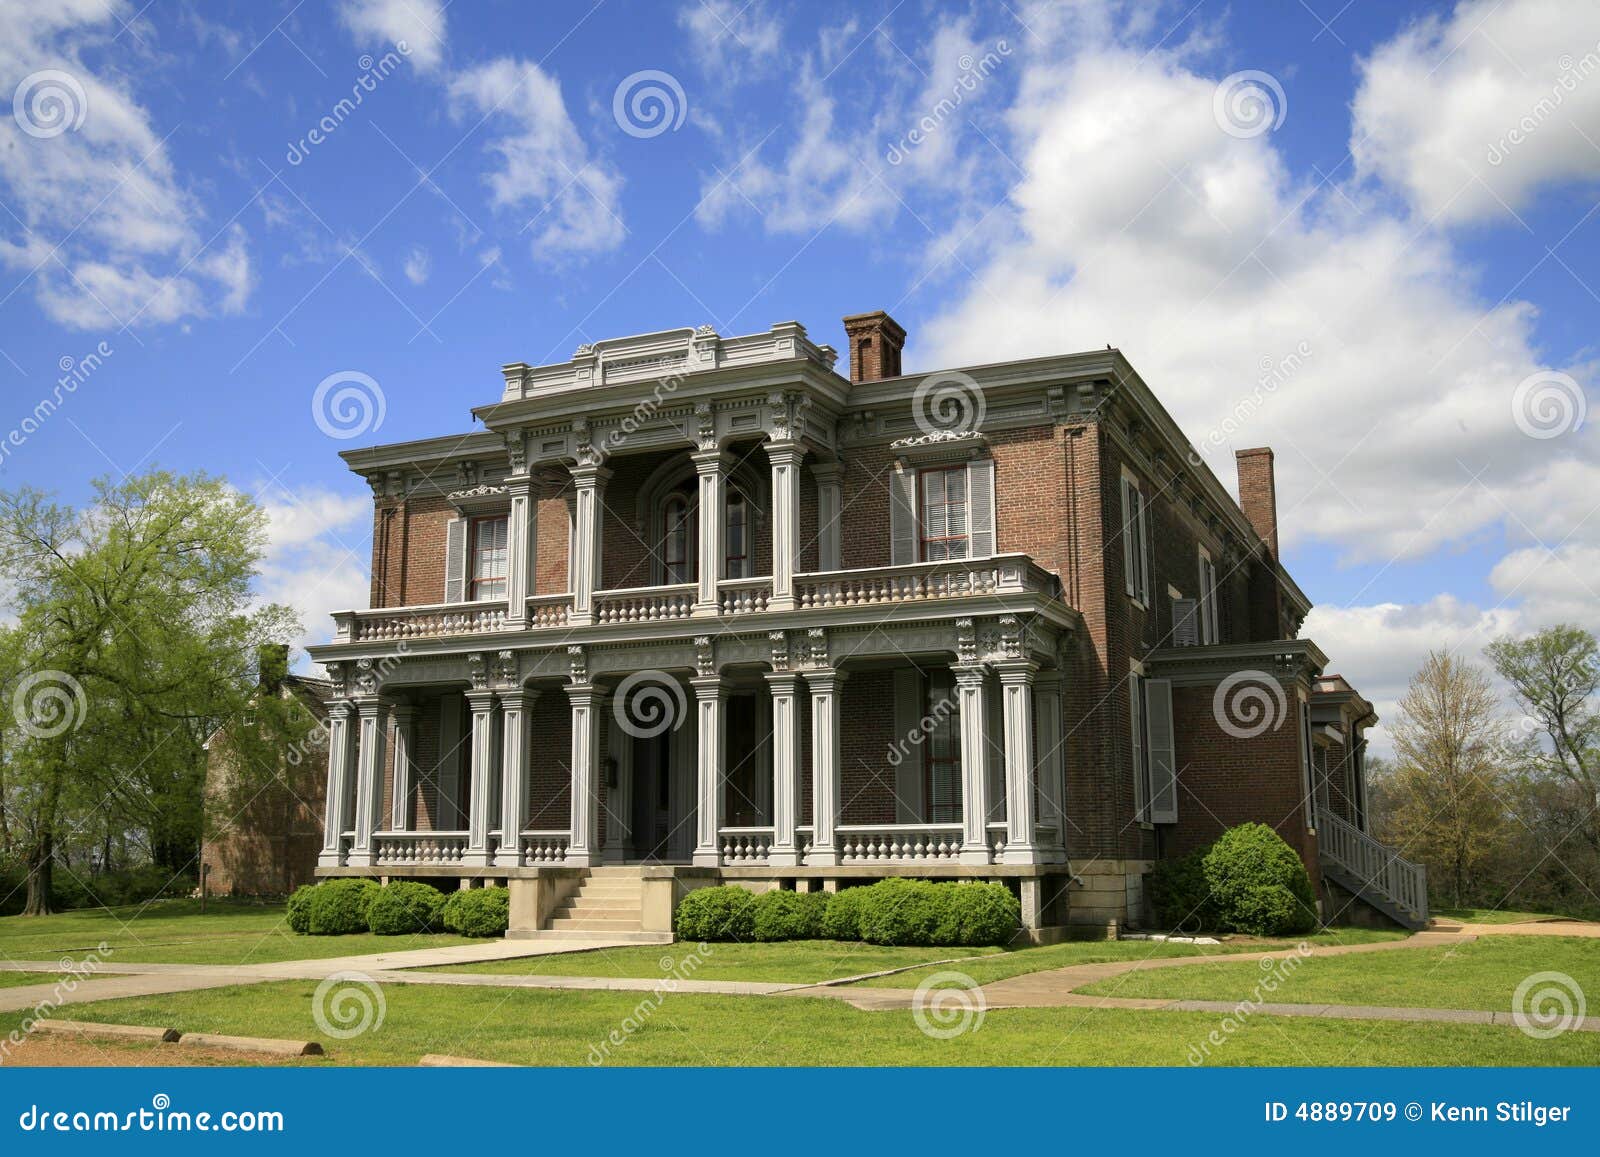 two rivers mansion